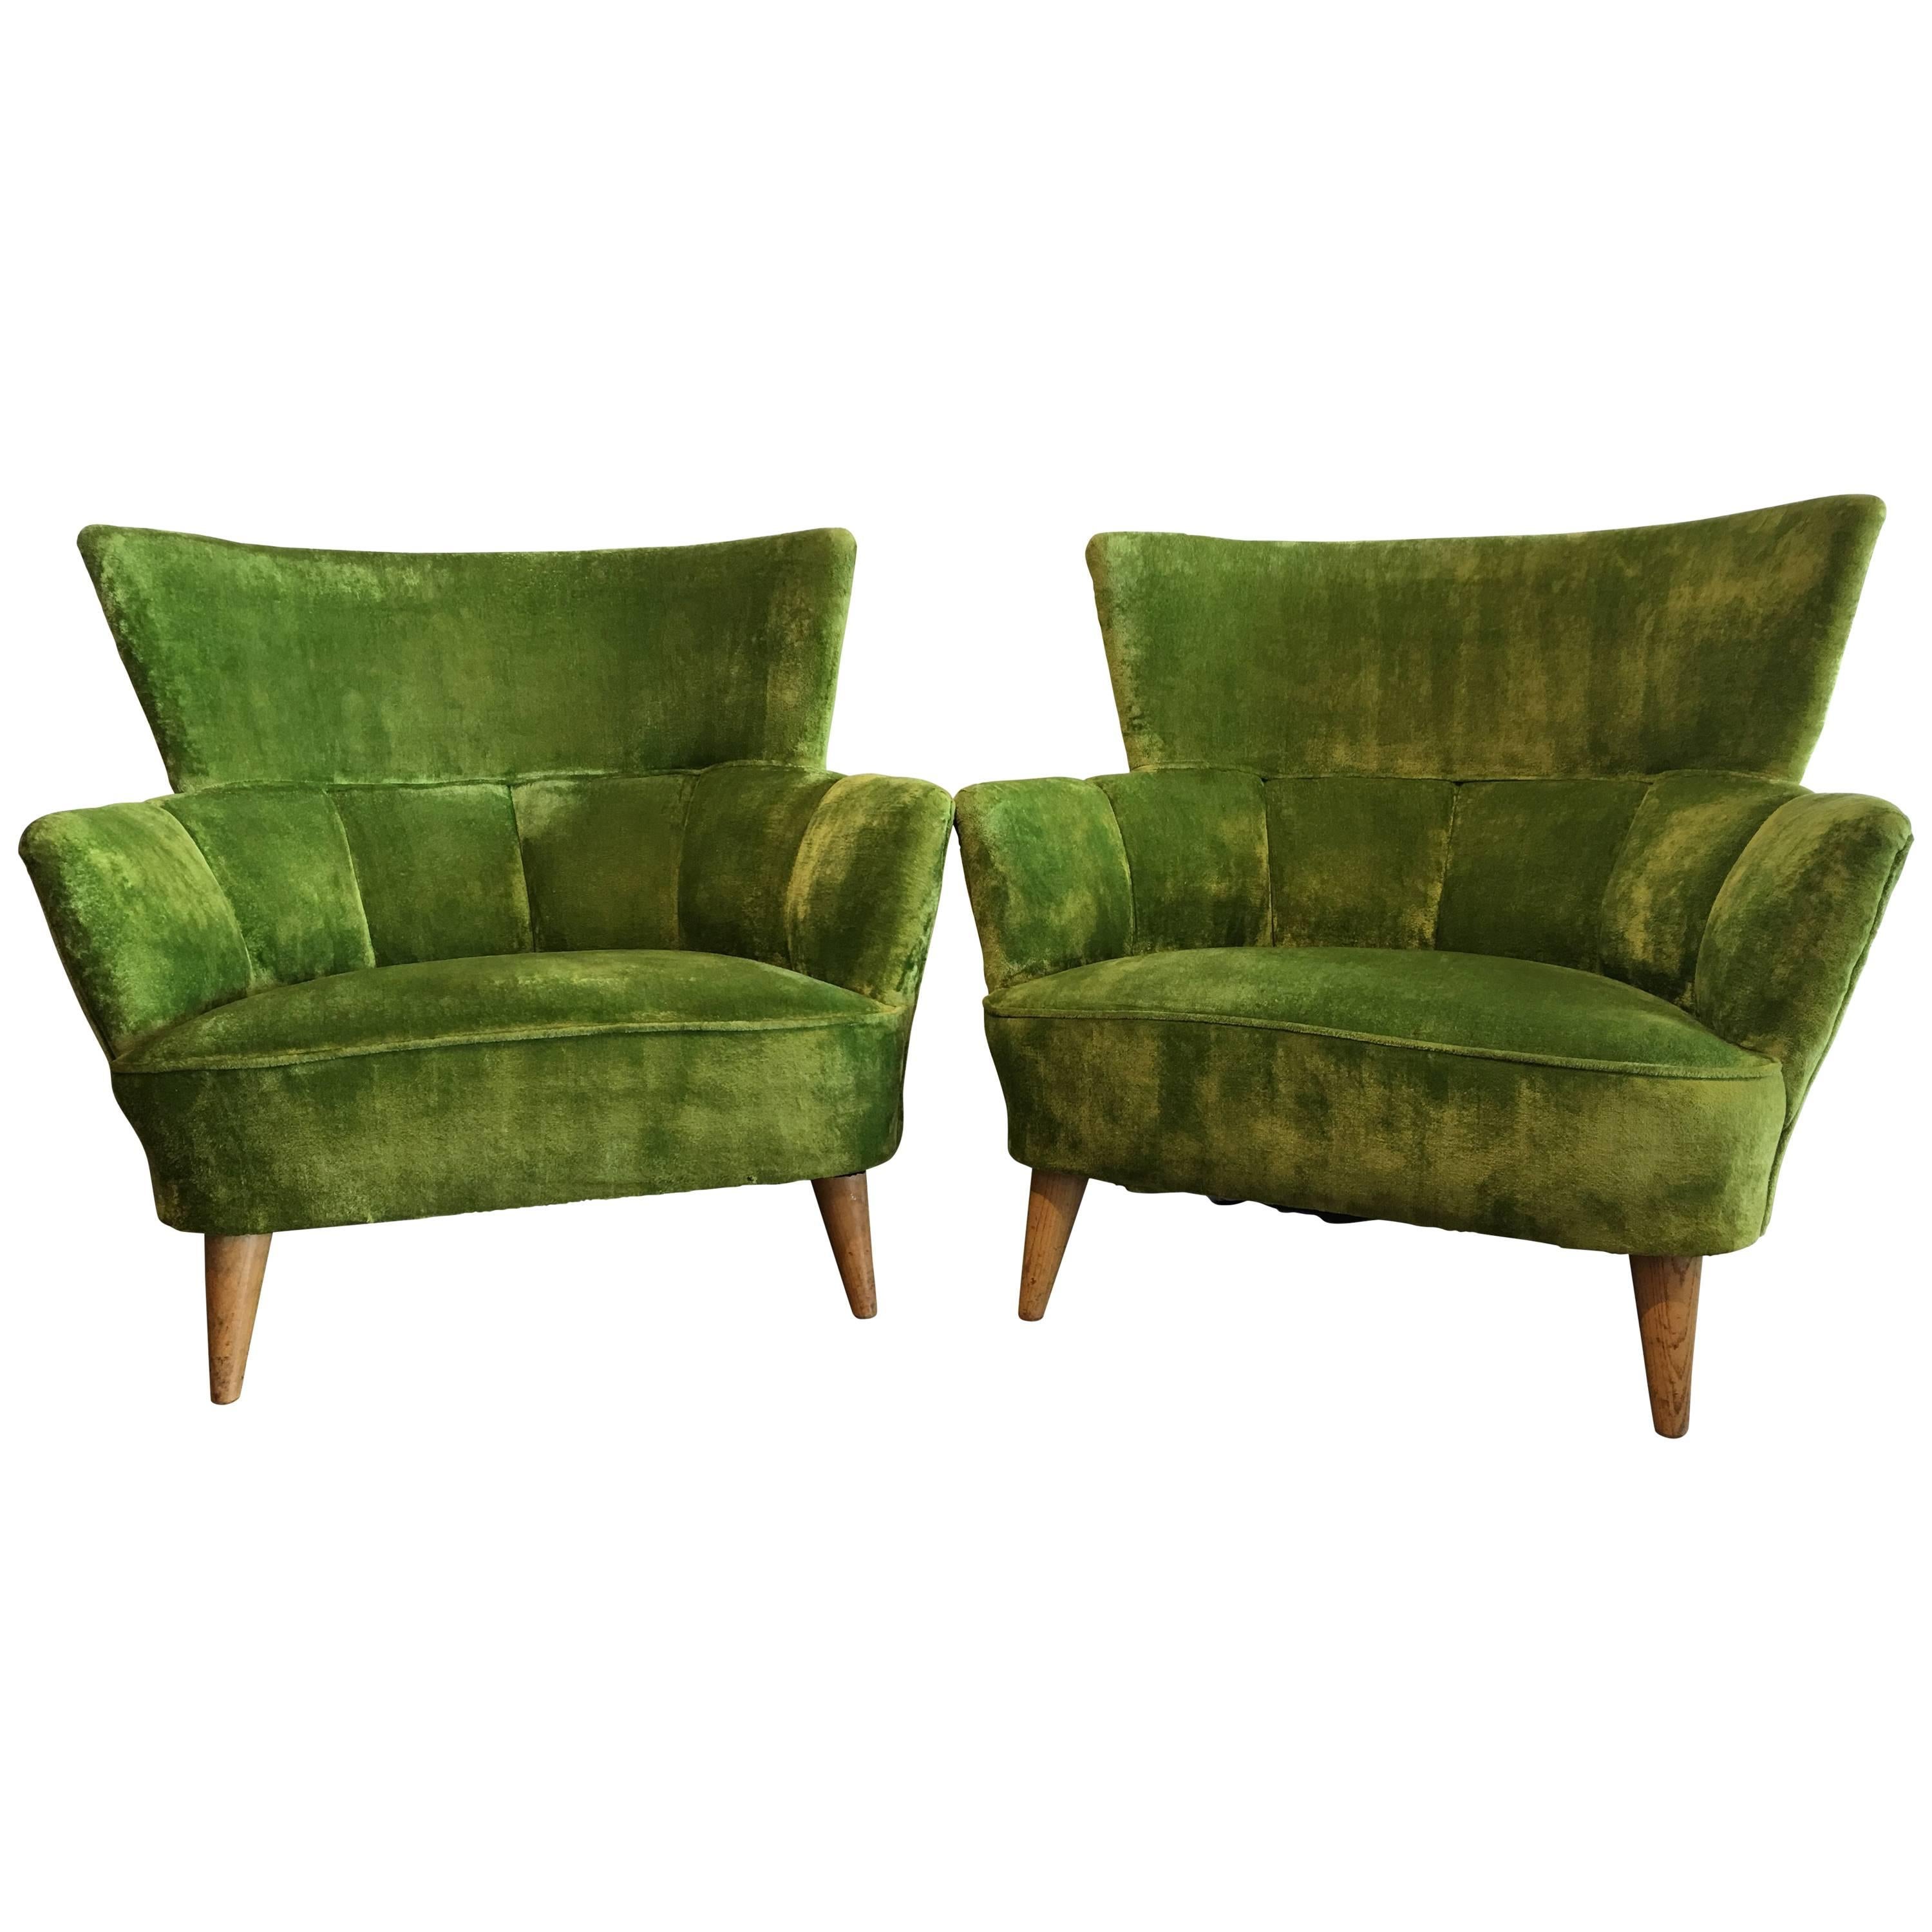 Midcentury Lime Green Chairs Covered in Original Fabric